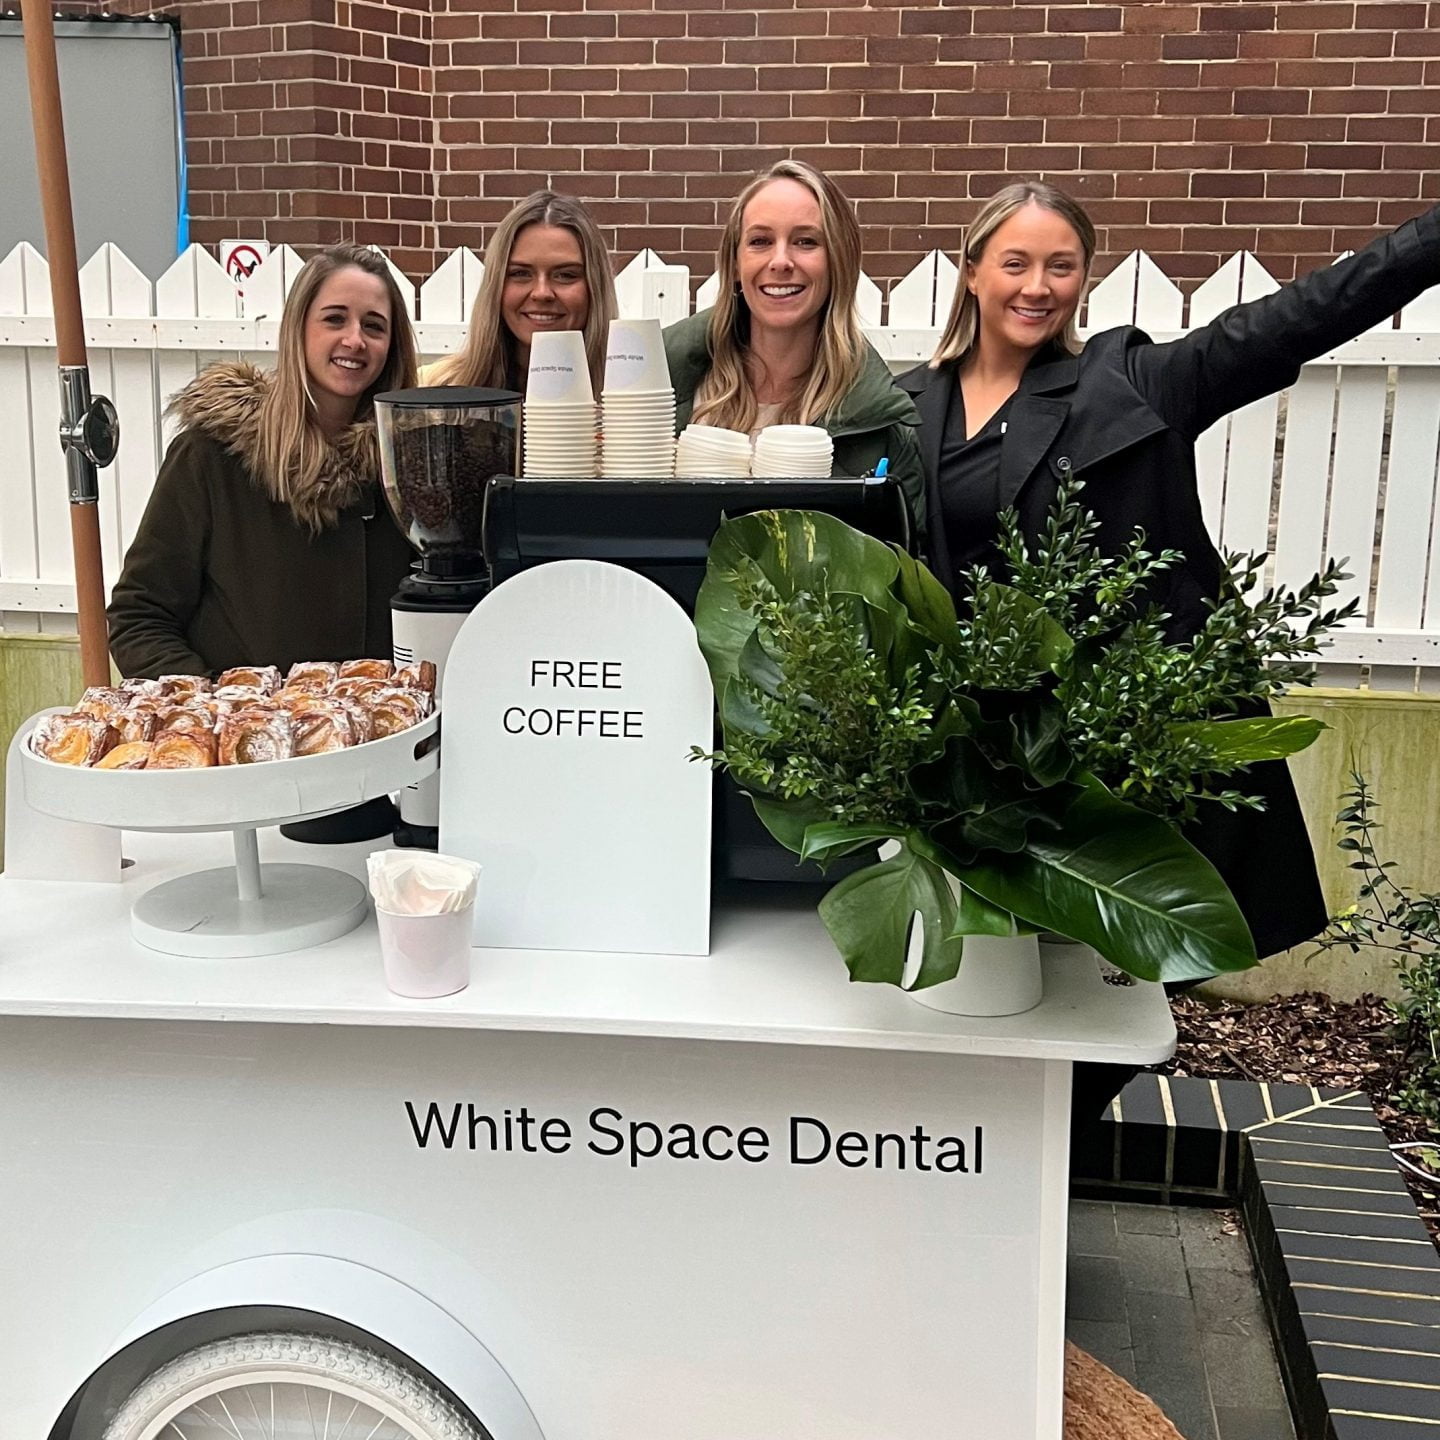 White Space Dental coffee cart and team